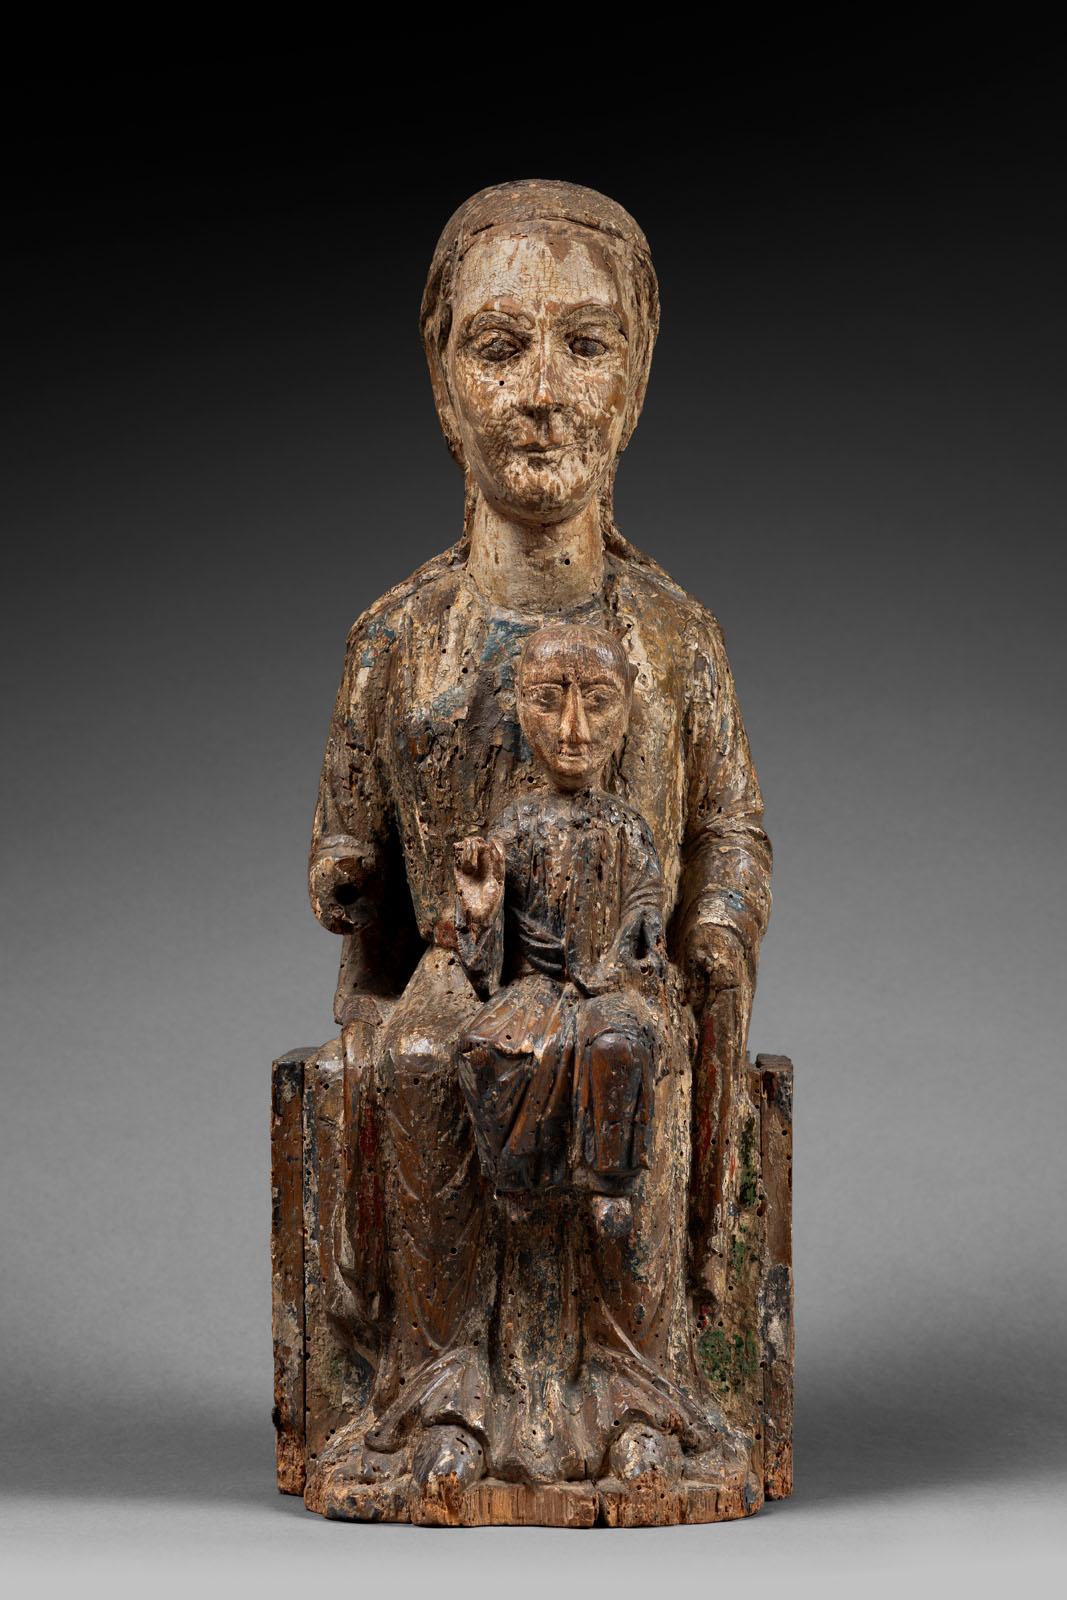 Exceptional virgin and child in majesty
or “Sedes Sapientiae”, throne of wisdom


Origin: southwestern France.
Period: late 12th - early 13th century.

Height: 46cm
Length: 18cm
Depth: 14.5cm 


Walnut wood
Good traces of